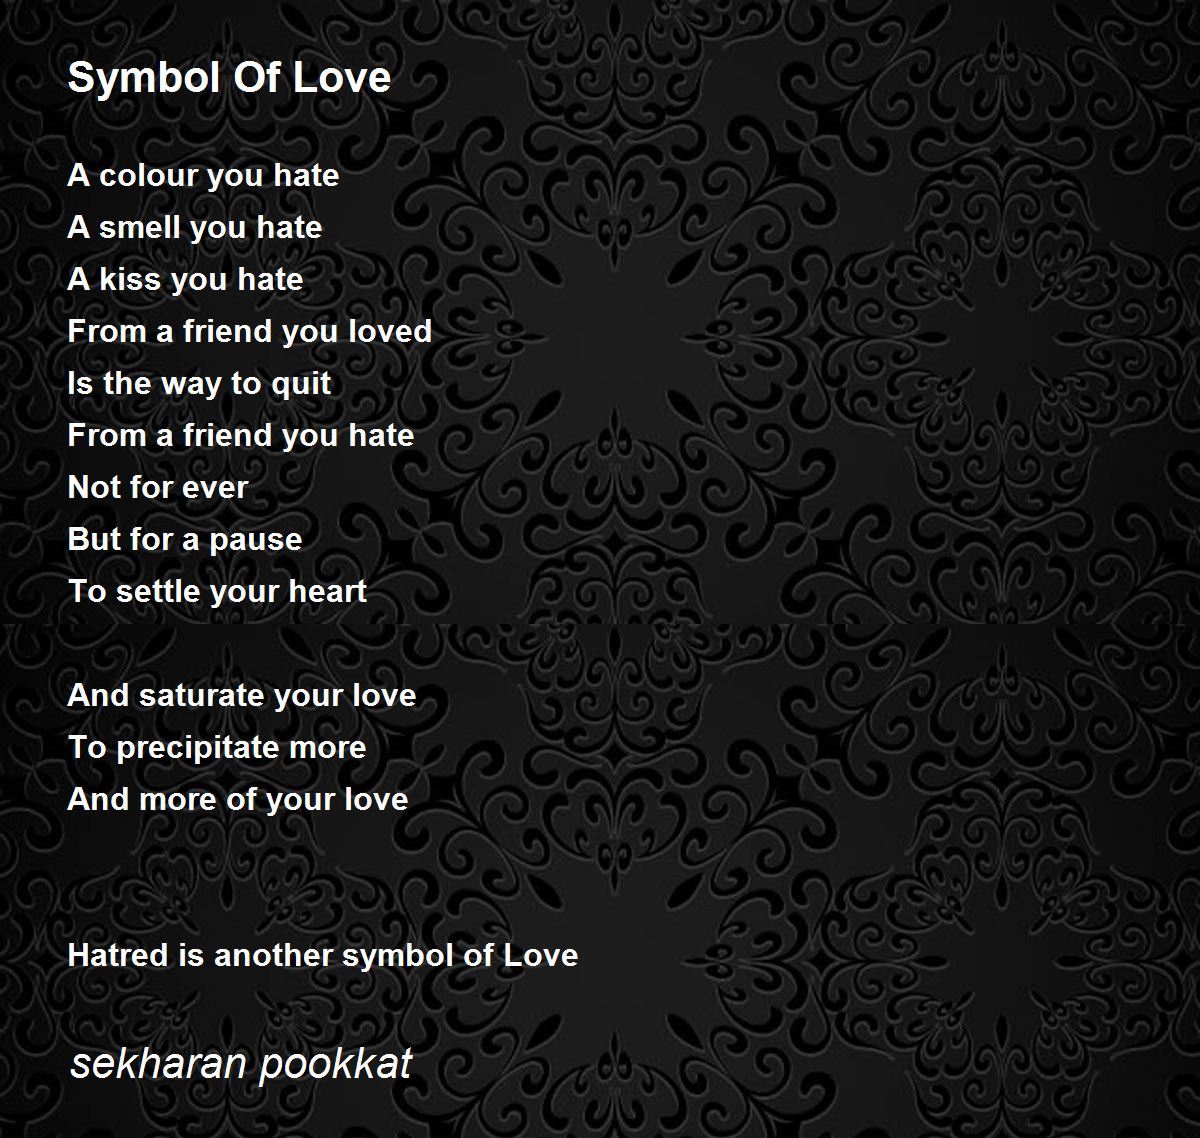 what are symbols in a poem